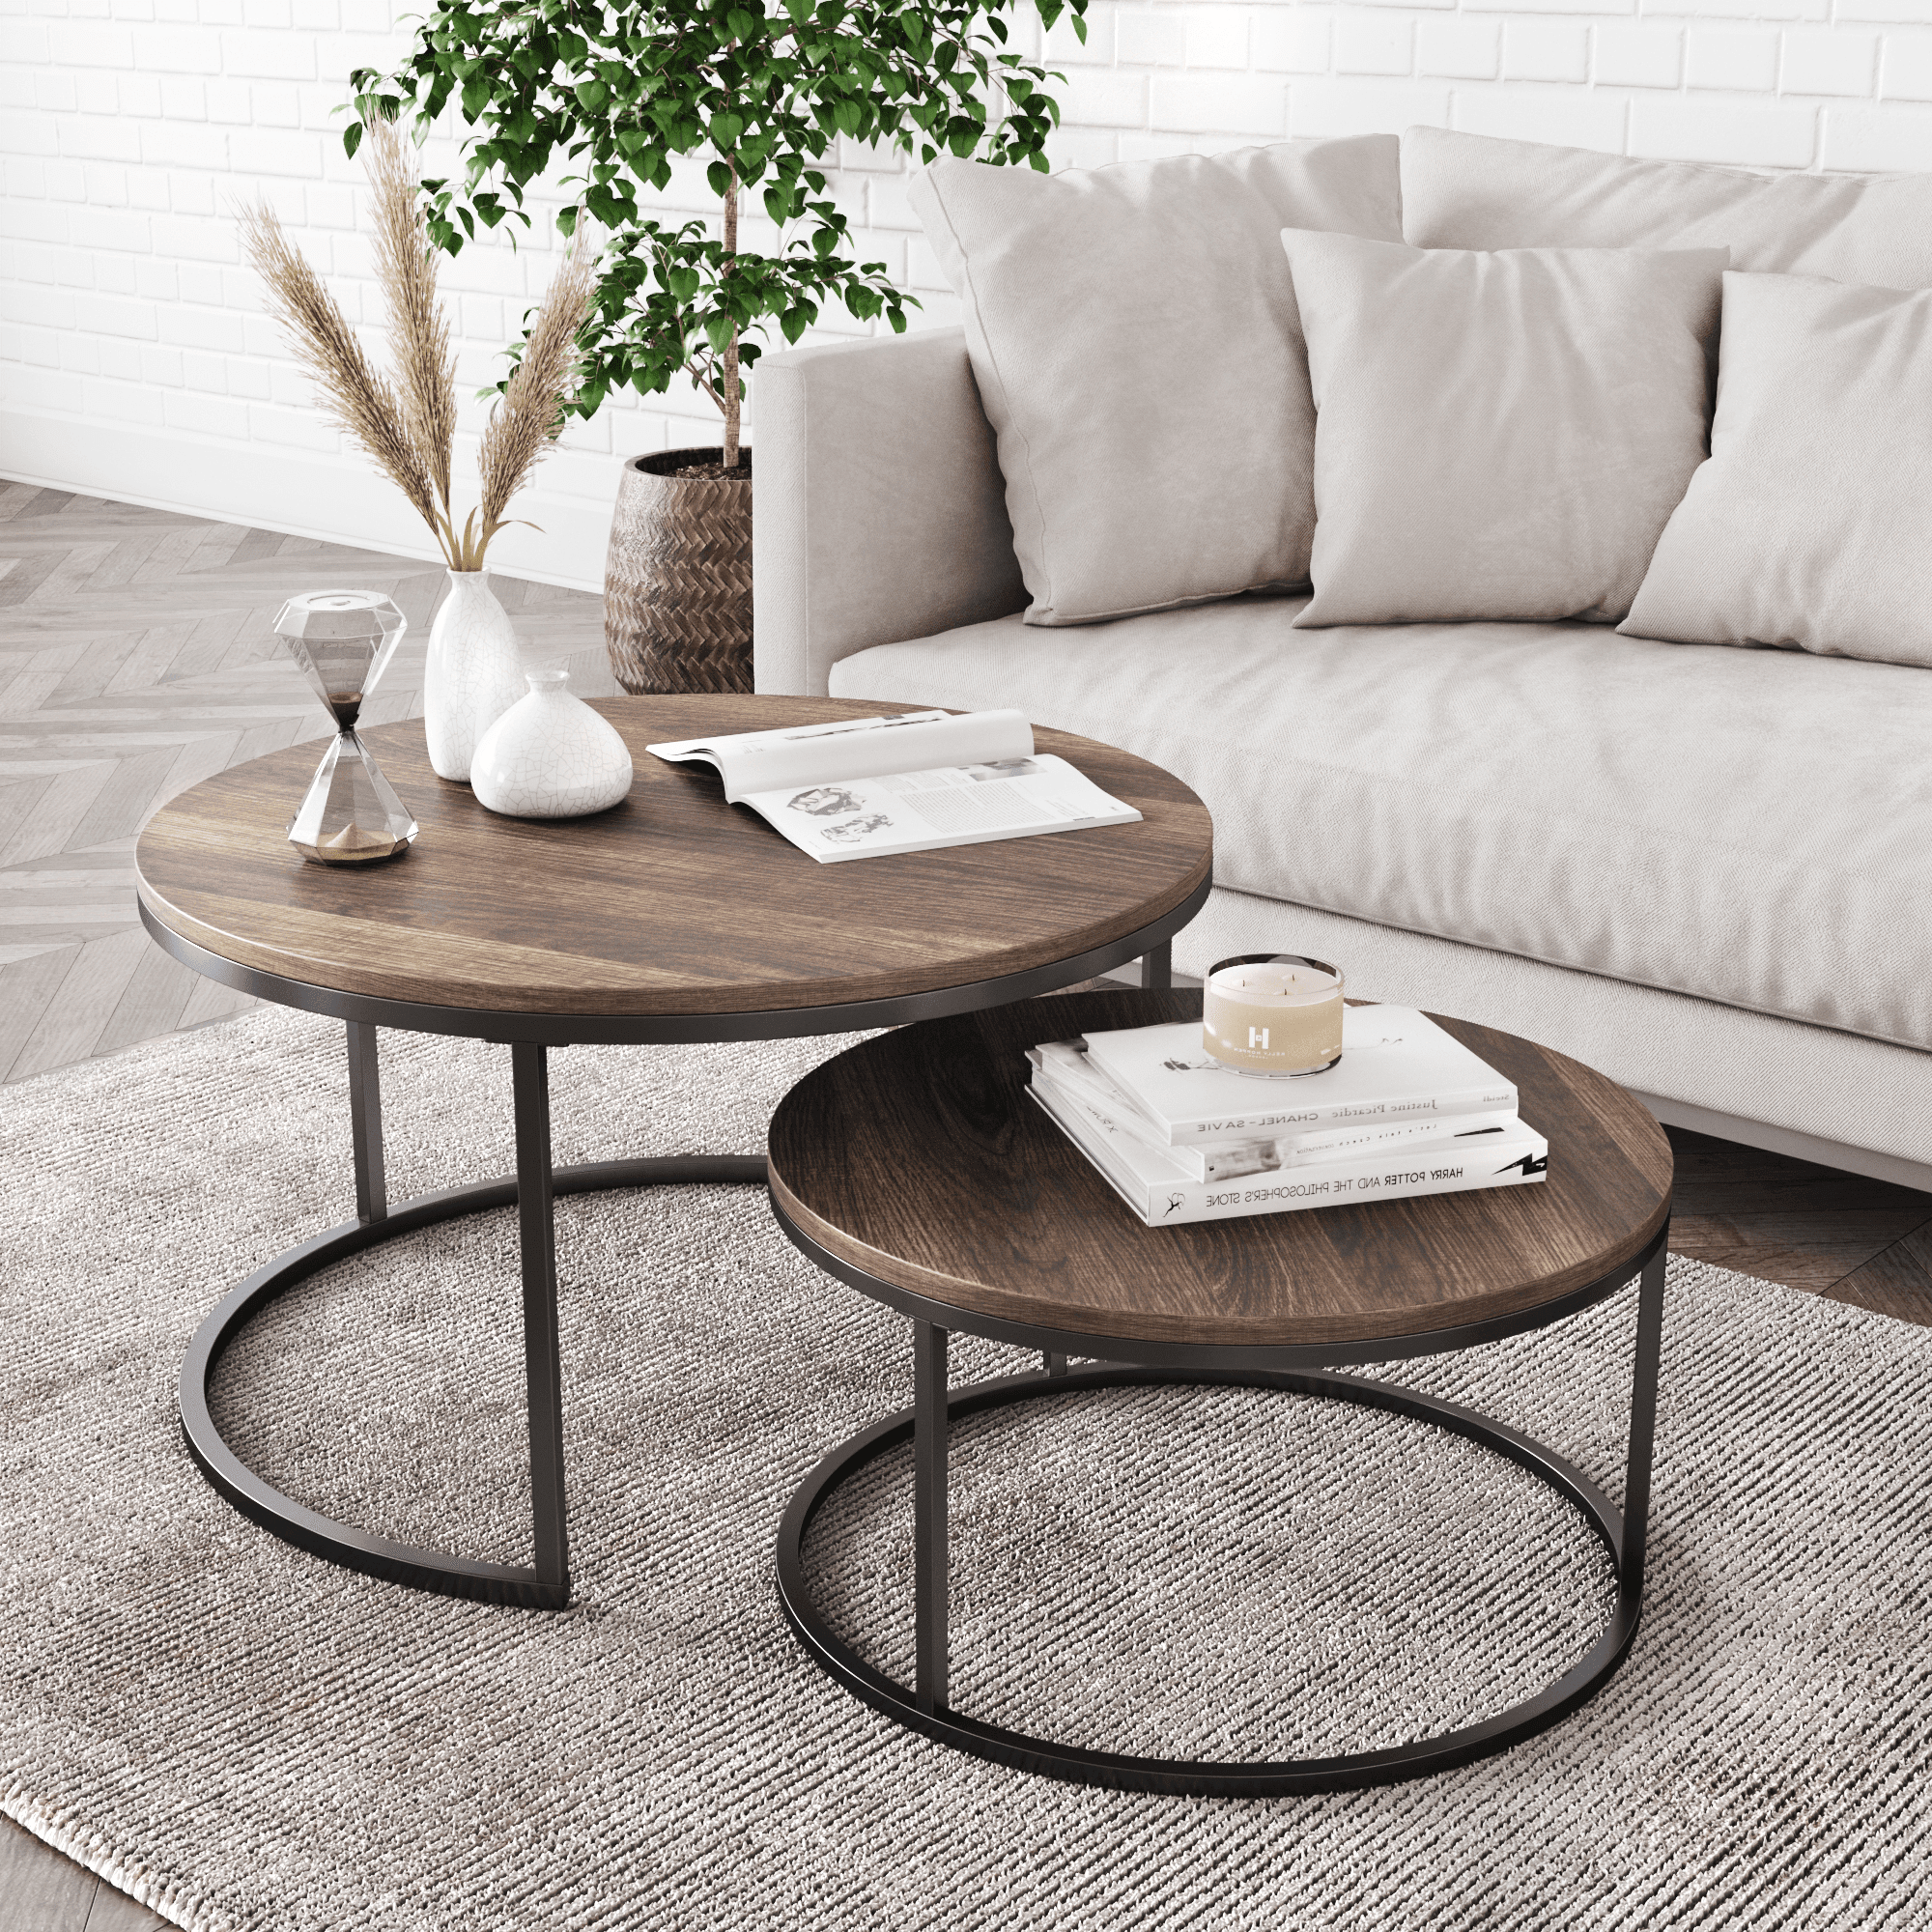 Stella Round Nesting Or Stacking Coffee Table Set Of 2 Wood Finish Throughout Famous Round Coffee Tables With Steel Frames (View 8 of 15)